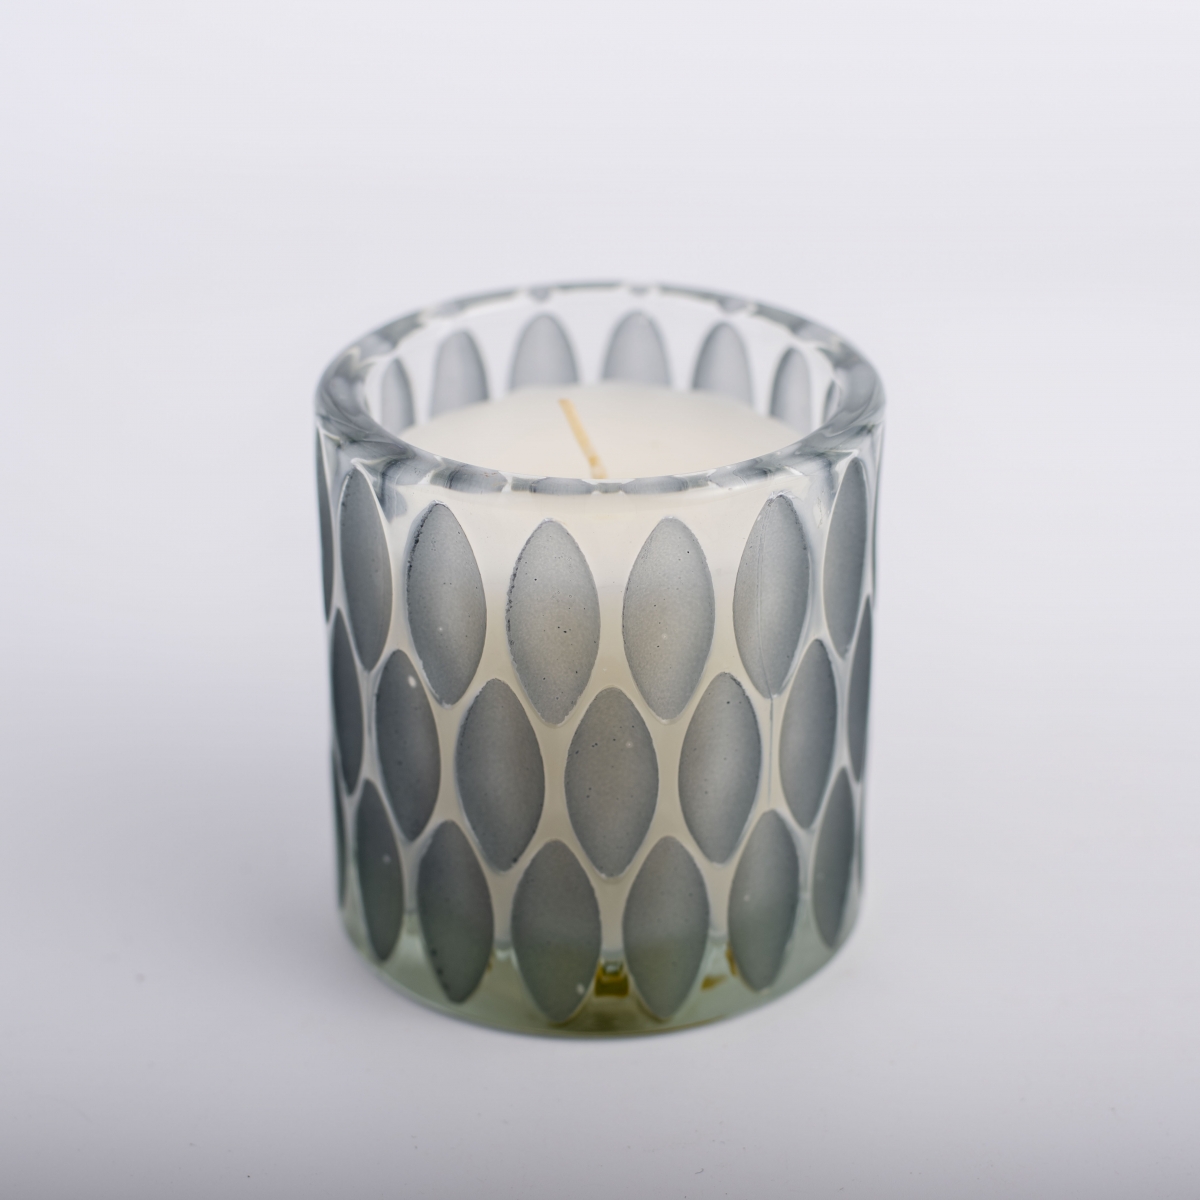 Vegan Candles – Soy Wax ,ECO Friendly Candles , Scented Candles In Glass Jar ,Polishing Geometric Leaf , Aromatherapy Candles ,China Factory ,Price-HOWCANDLE-Candles,Scented Candles,Aromatherapy Candles,Soy Candles,Vegan Candles,Jar Candles,Pillar Candles,Candle Gift Sets,Essential Oils,Reed Diffuser,Candle Holder,